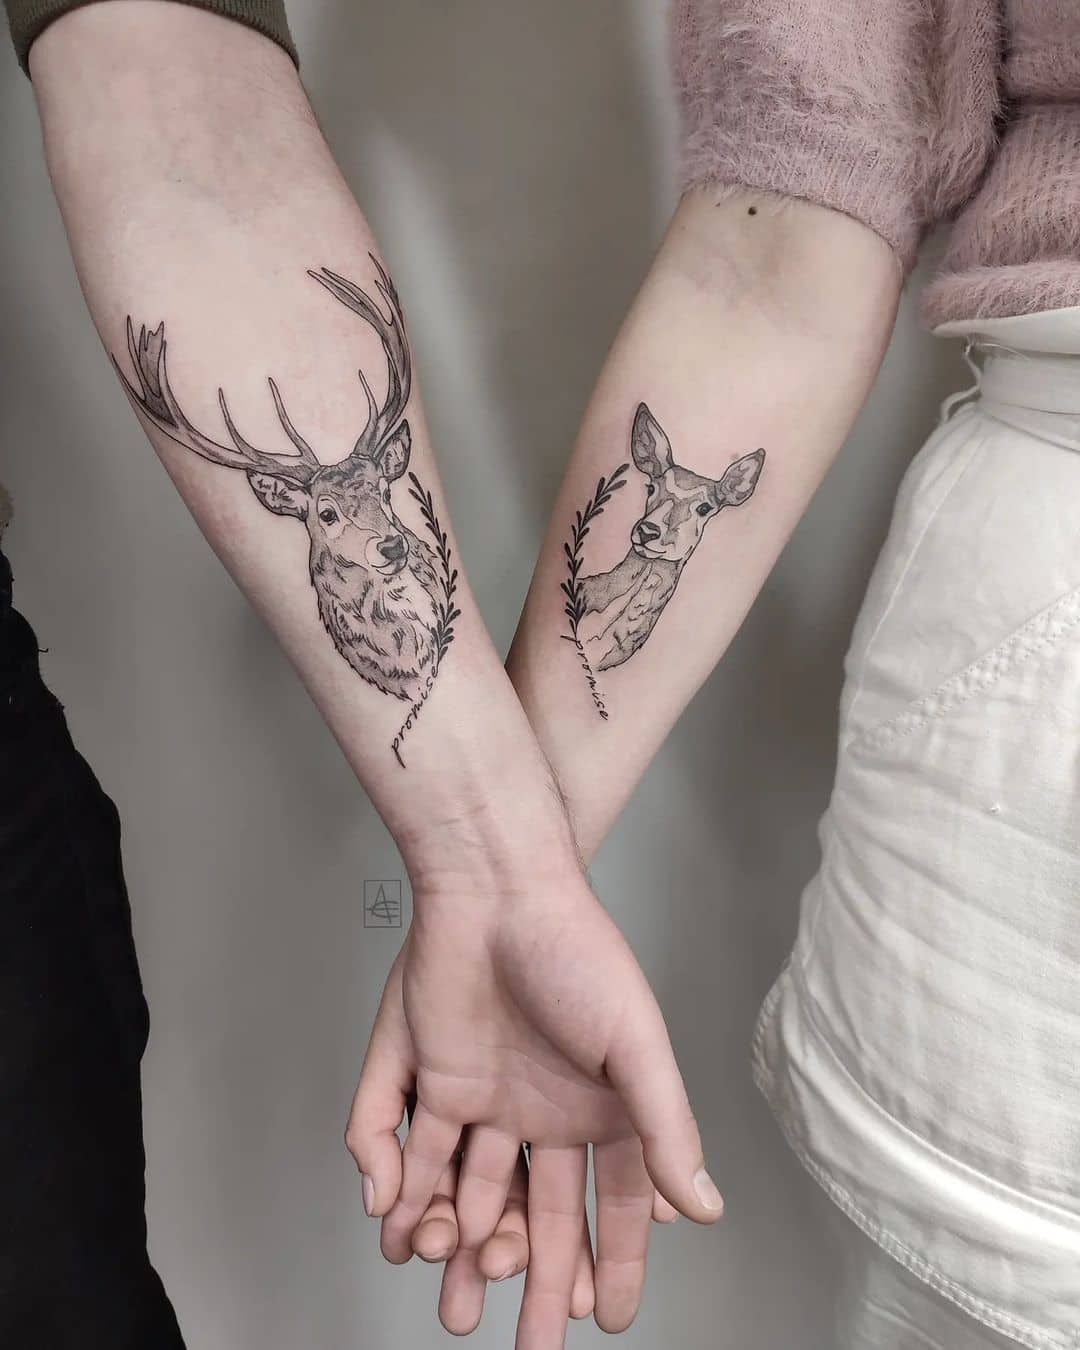 250 Pictures Of Deer Tattoos Pictures Stock Photos Pictures   RoyaltyFree Images  iStock